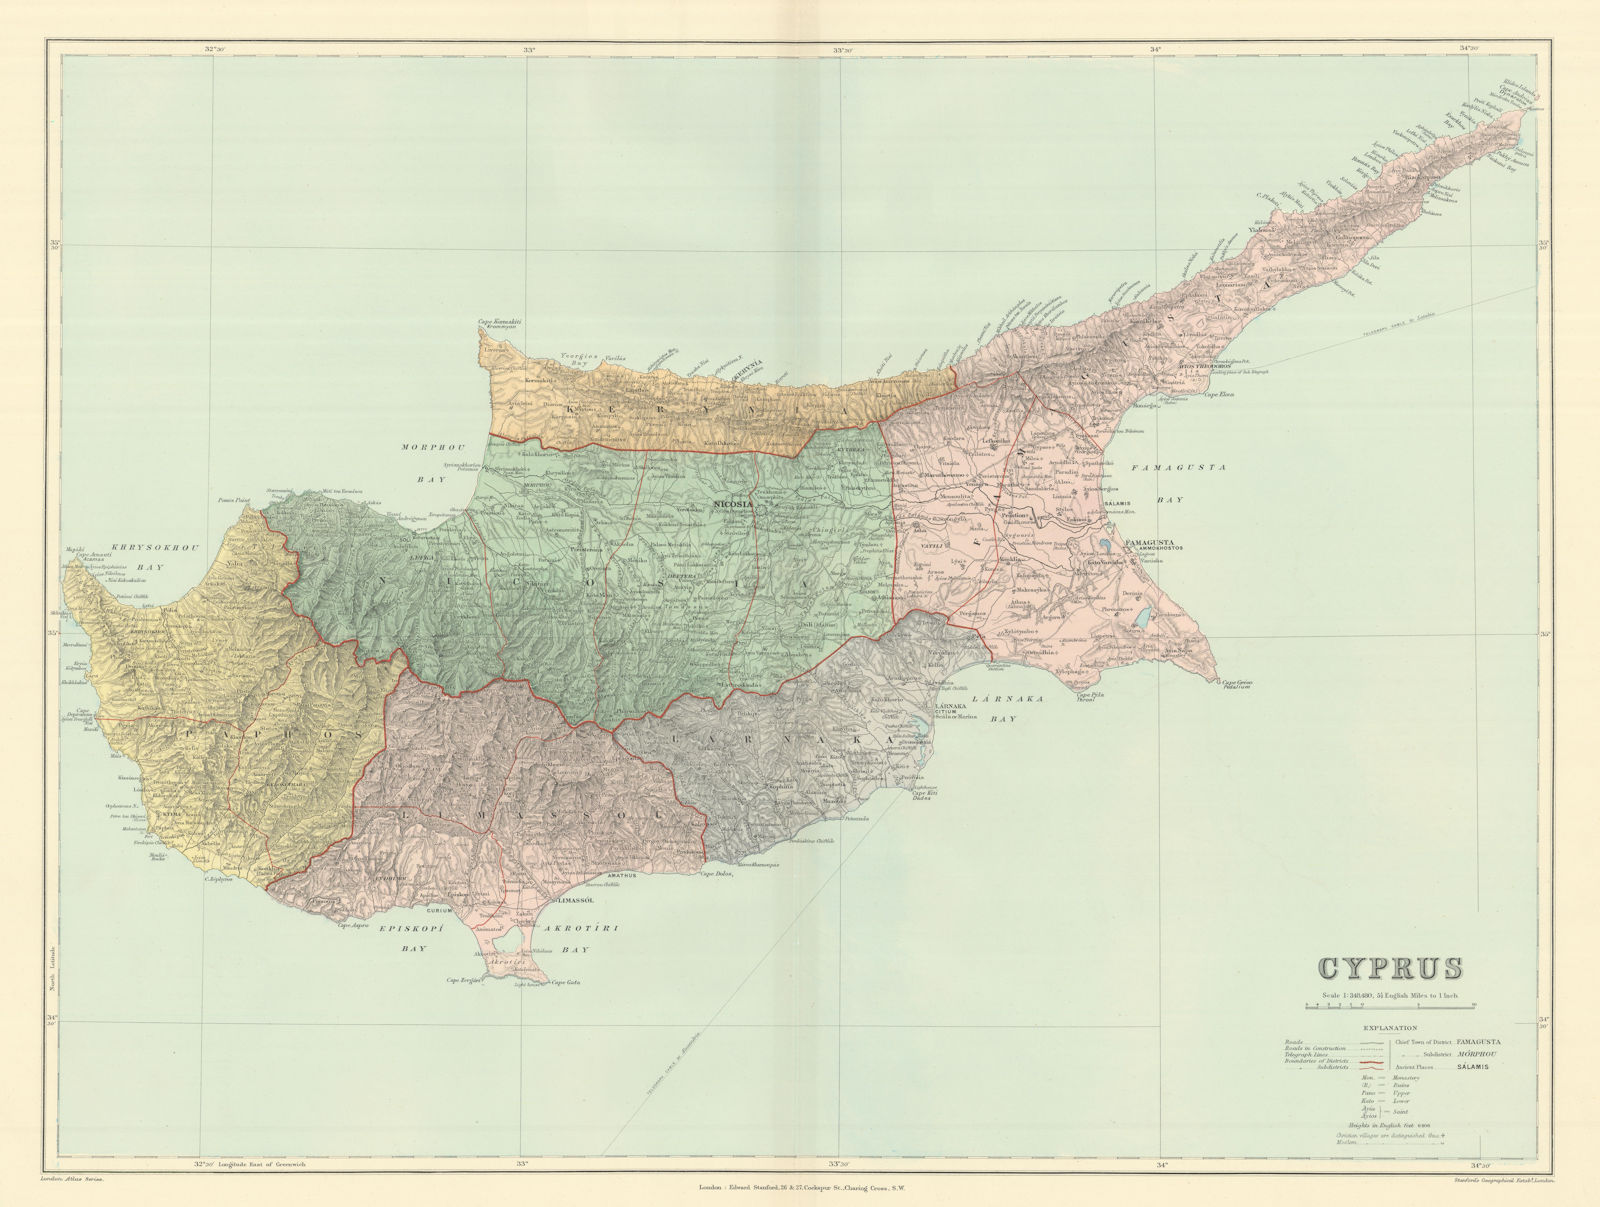 Associate Product Cyprus. Districts. Ancient sites. Large 51x66cm. STANFORD 1894 old antique map